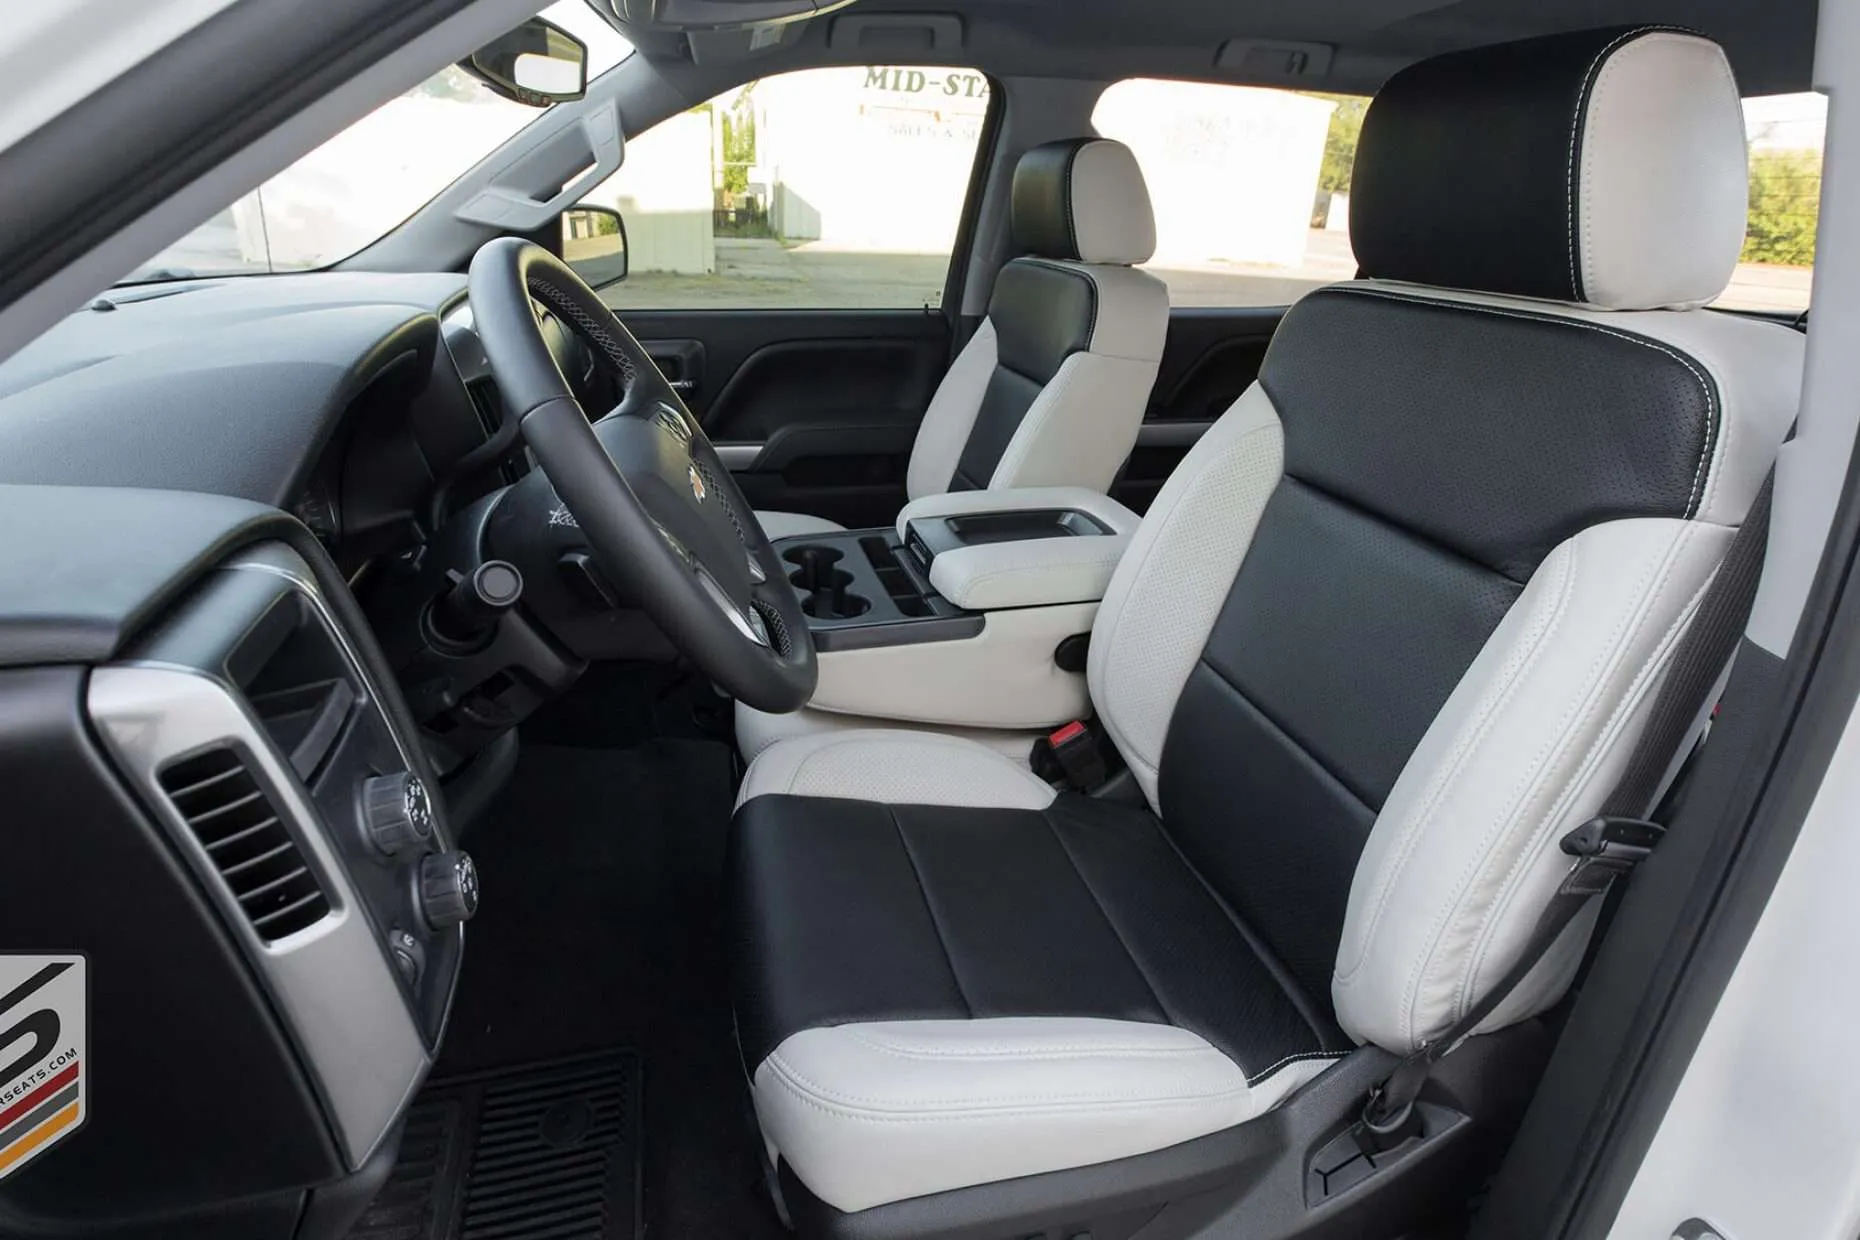 2014-2018 Chevrolet Silverado with custom leatherseats.com upholstery in Alabaster with Black Centers